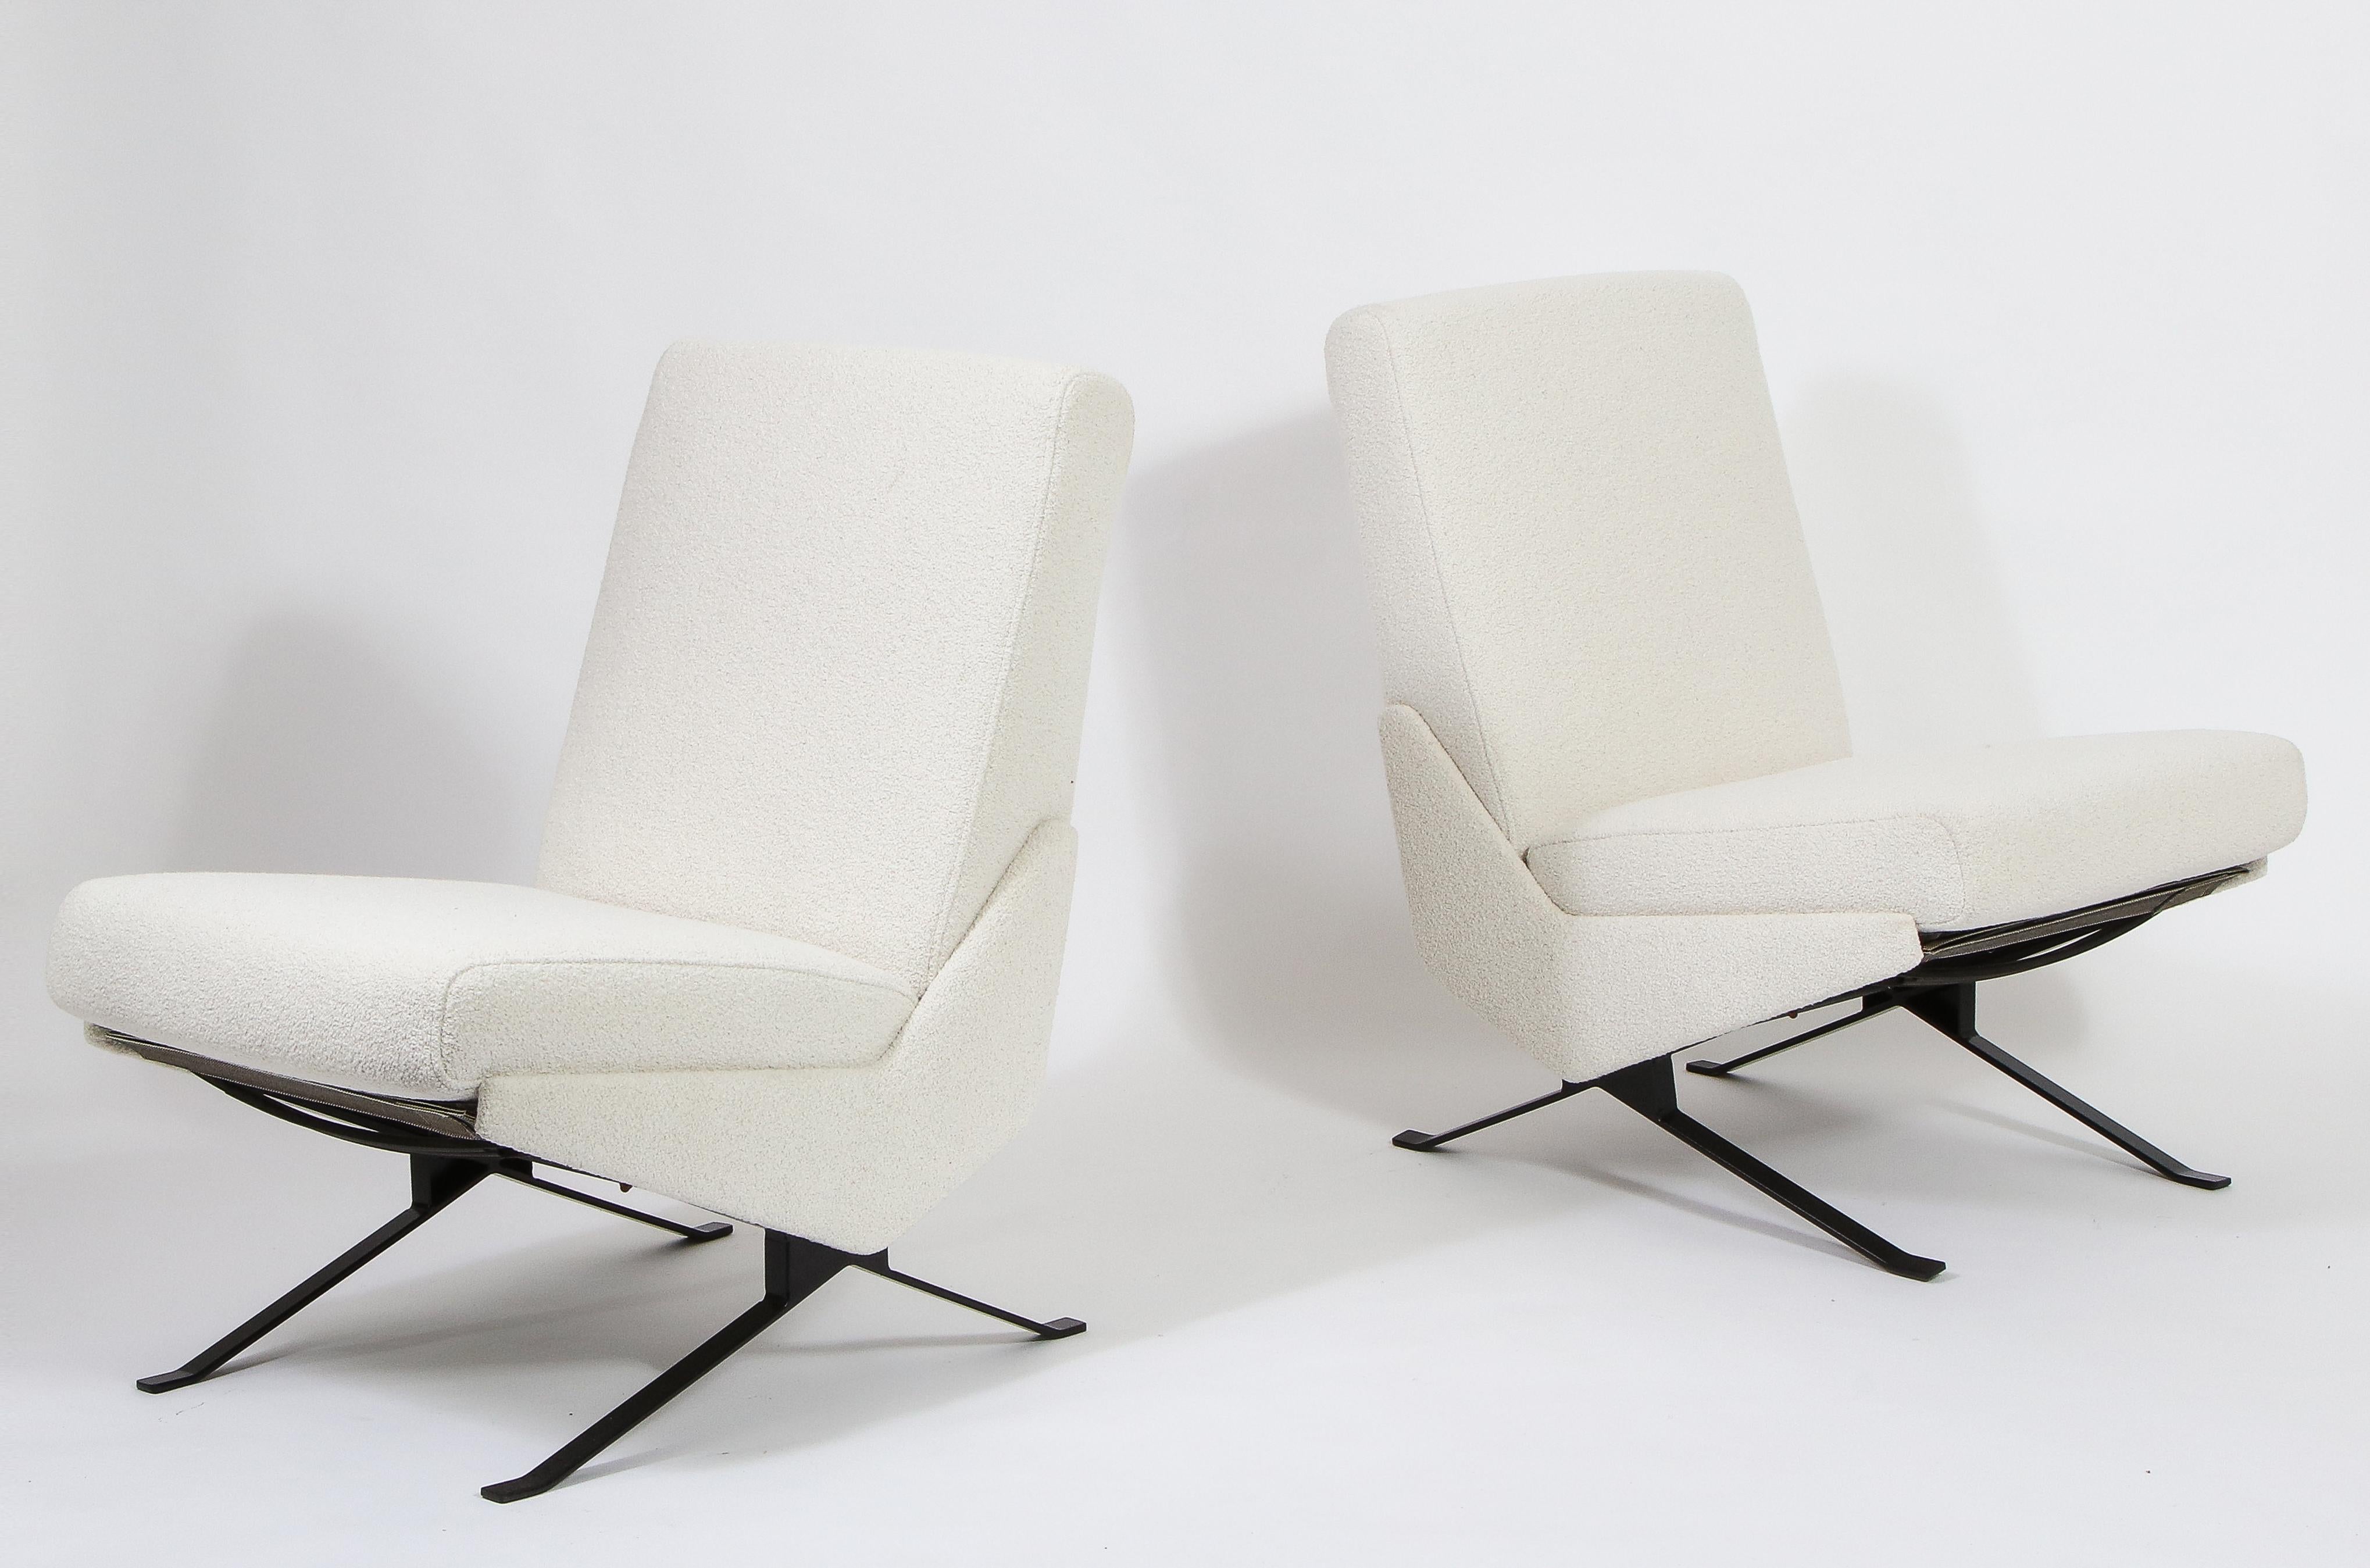 A pair of Troika slipper chairs by Pierre Guariche. This model is the lesser-seen variant without arms on enameled flat steel legs. Of note, the braces between the legs and the chair frame in the shape of an asymmetrical bowtie. New boucle